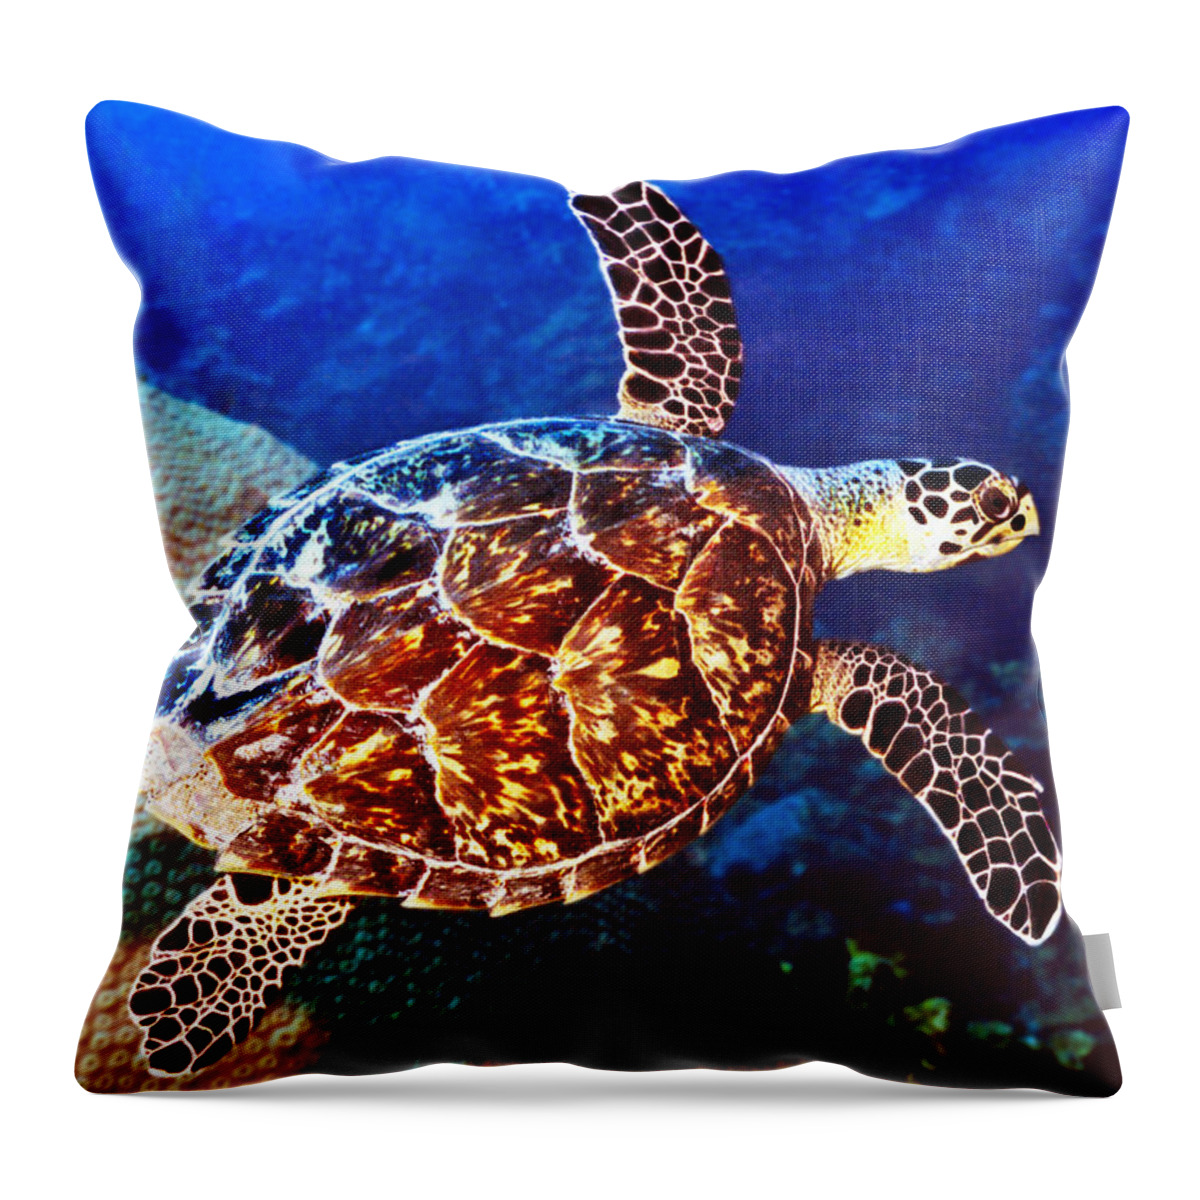  Swimming Sea Turtle Throw Pillow featuring the photograph Hawksbill by Jean Noren